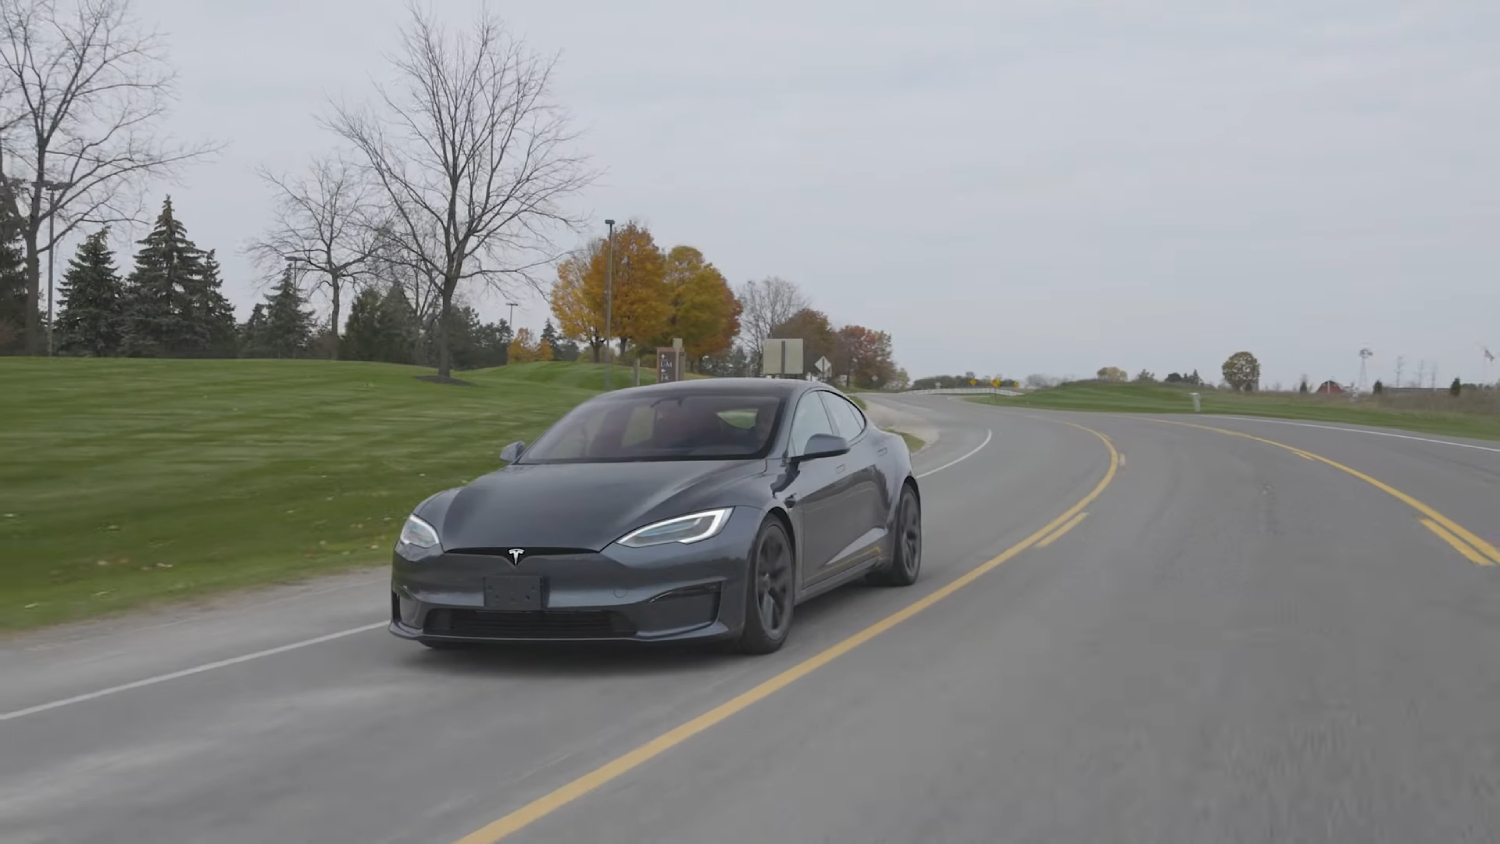 Car and Driver tested the Model S Plaid charging capabilities